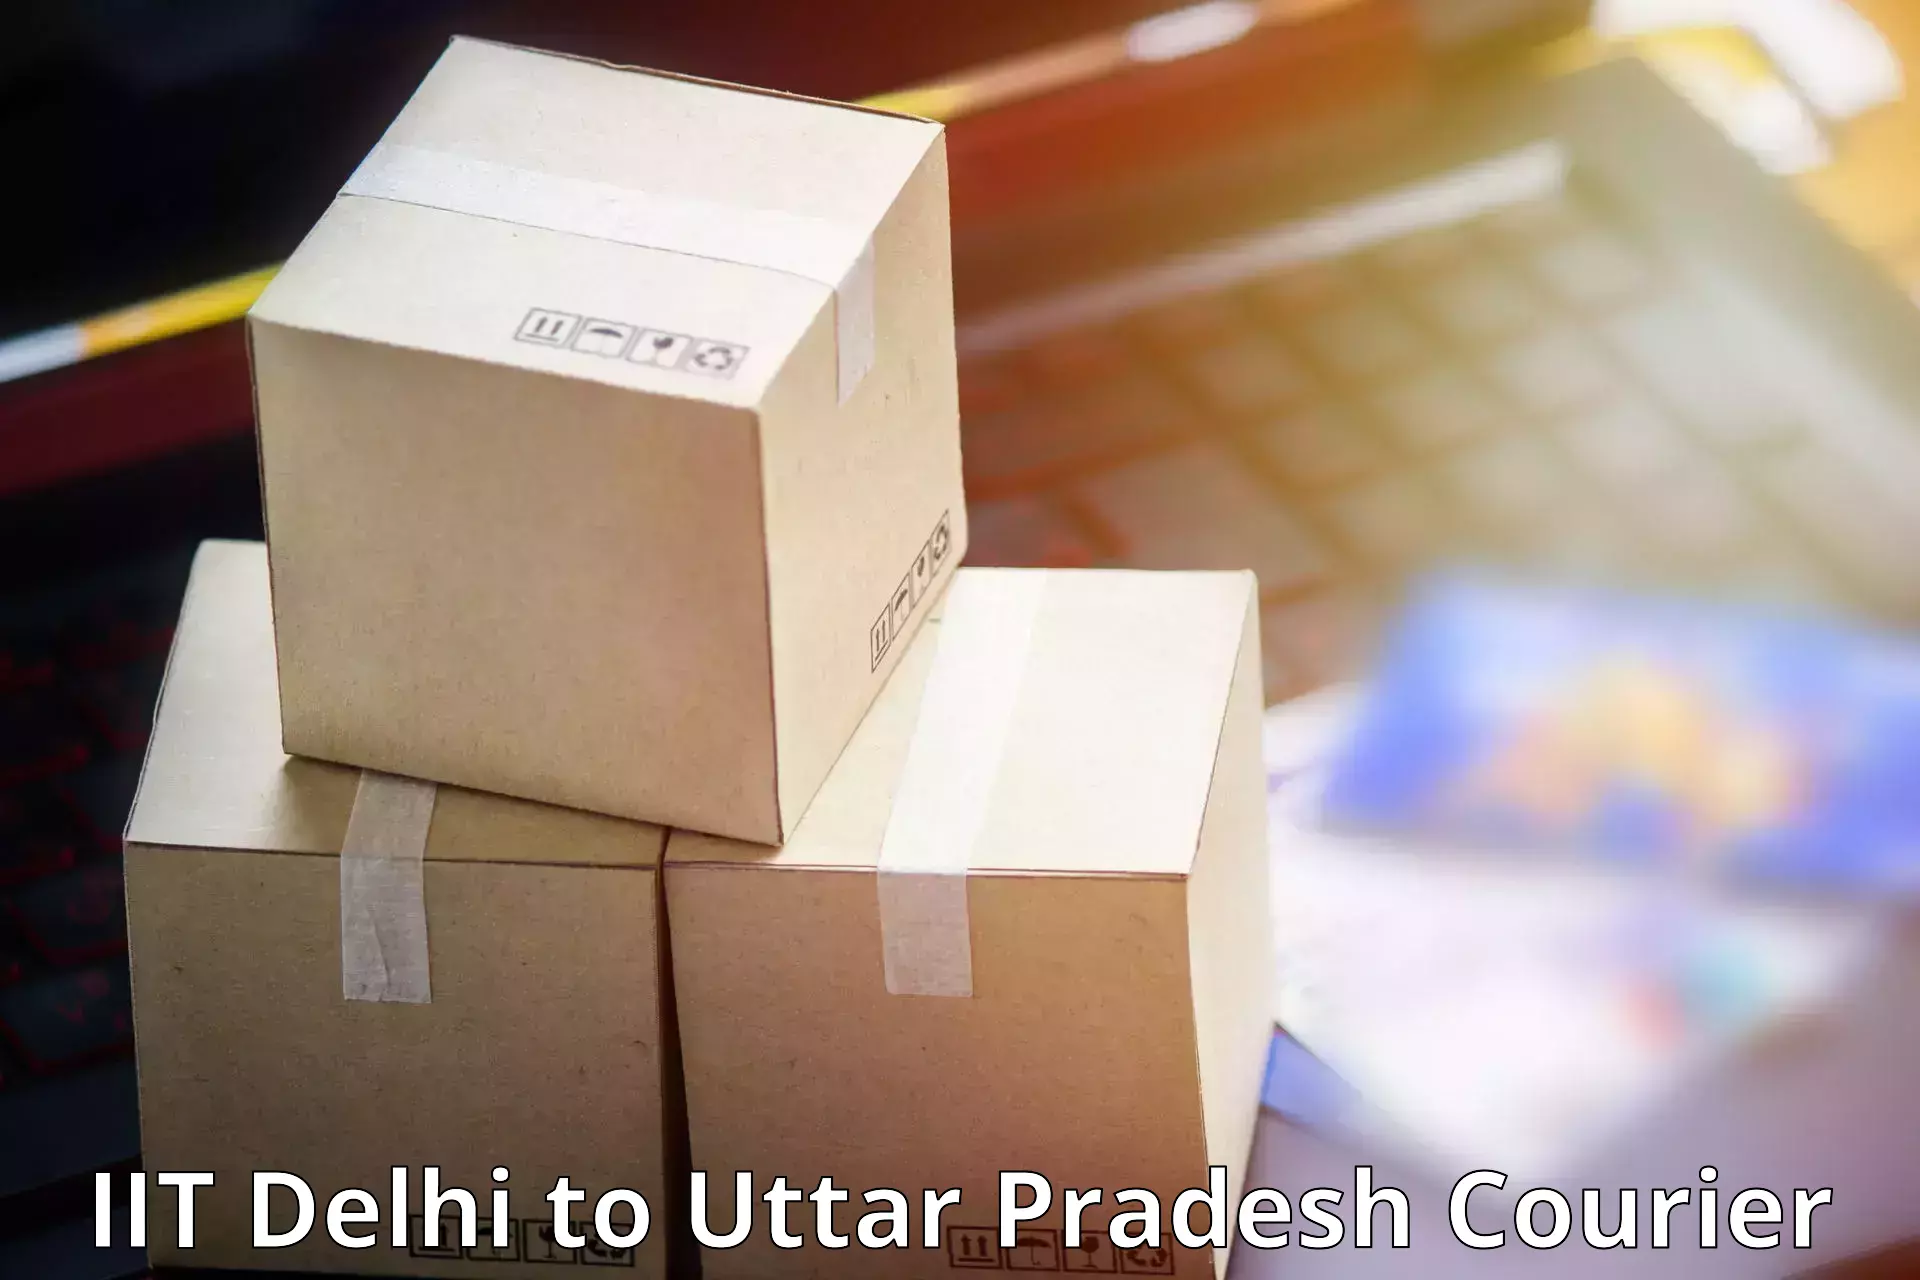 Express courier capabilities IIT Delhi to Sitapur